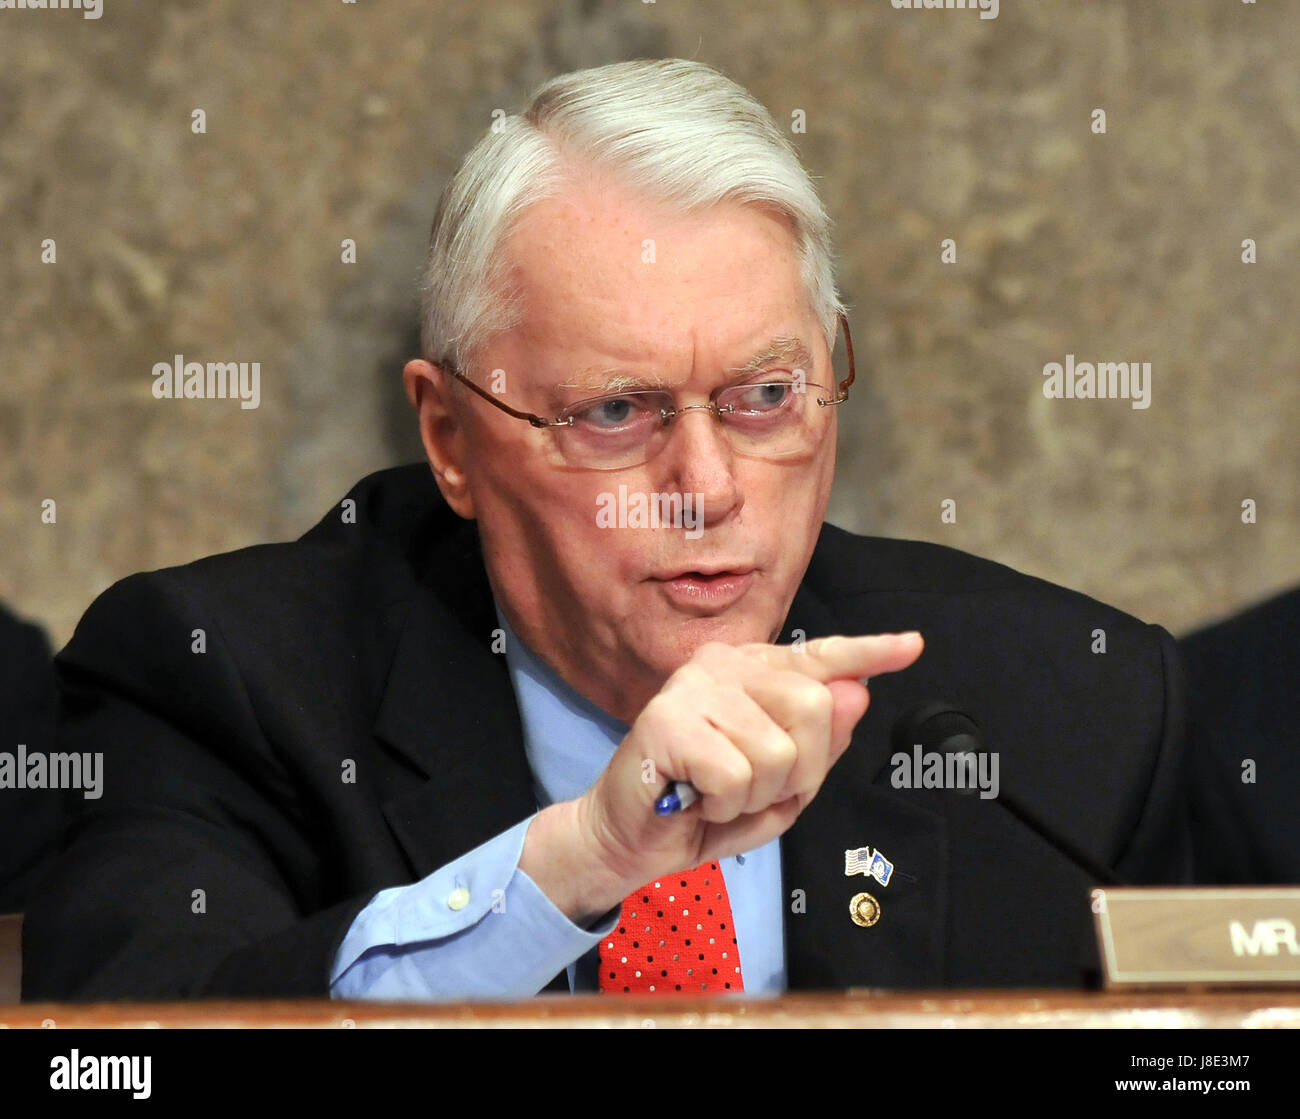 Washington, D.C. - September 23, 2008 -- United States Senator Jim Bunning (Republican of Kentucky) questions the witnesses during the United States Senate Committee on Banking, Housing and Urban Affairs hearing on 'Turmoil in US Credit Markets: Recent Actions Regarding Government Sponsored Entities, Investment Banks and Other Financial Institutions' in Washington, D.C. on Tuesday, September 23, 2008. The hearing focused on the United States Government's proposed 700 billion U.S. dollar bail-out of the banking system caused by poor lending practices of U.S. banks. Credit: Ron Sachs / CNP · NO  Stock Photo